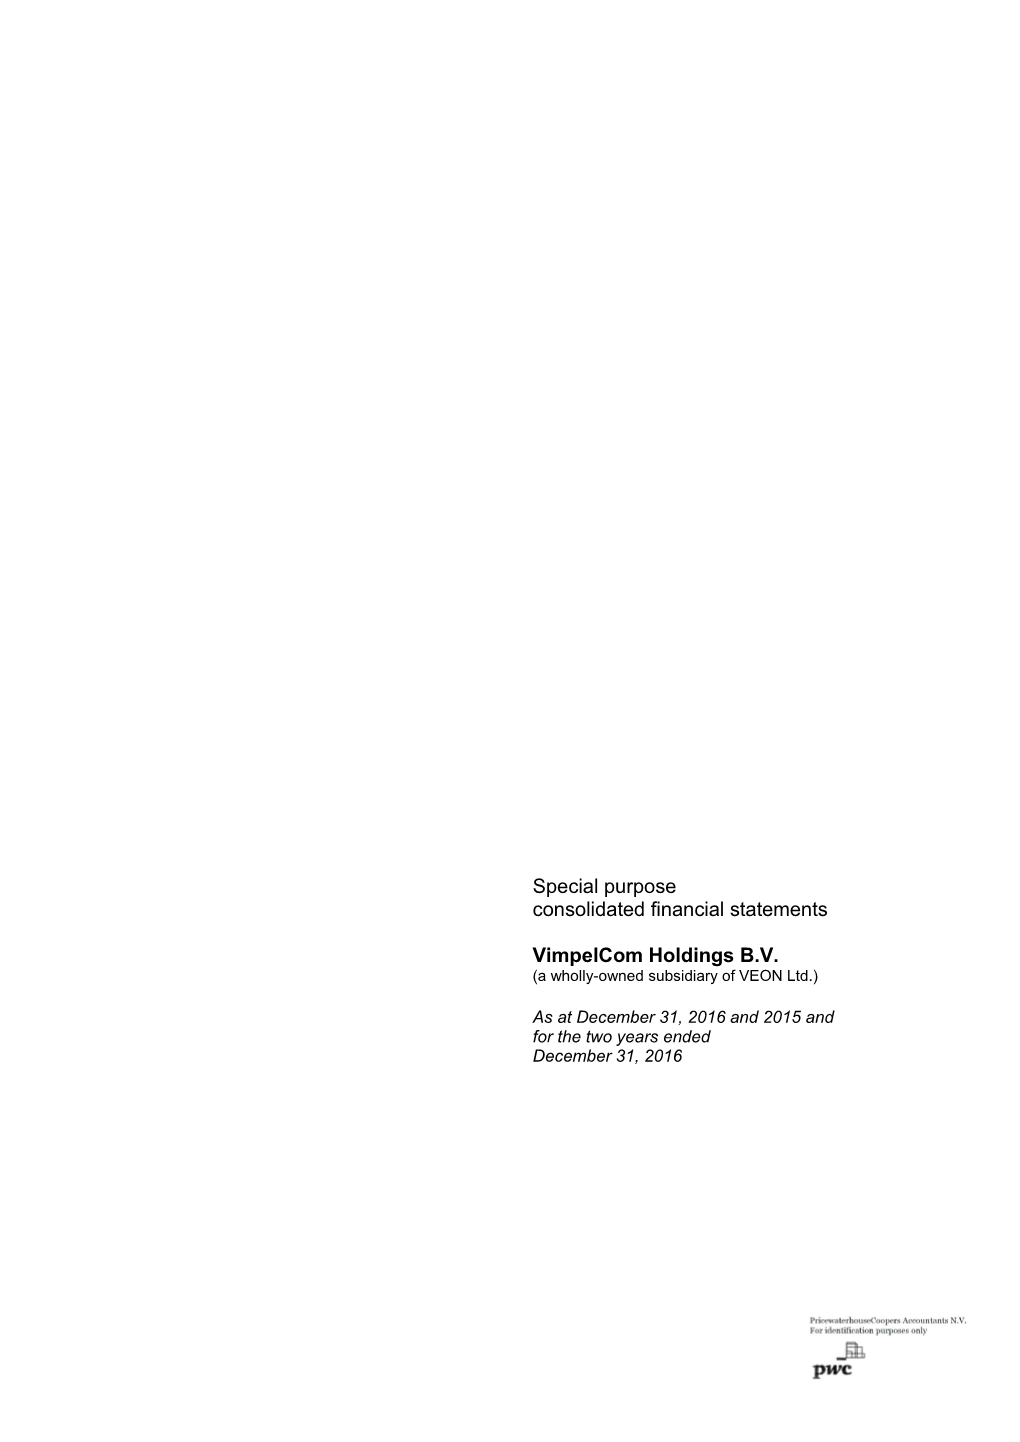 Special Purpose Consolidated Financial Statements Vimpelcom Holdings B.V